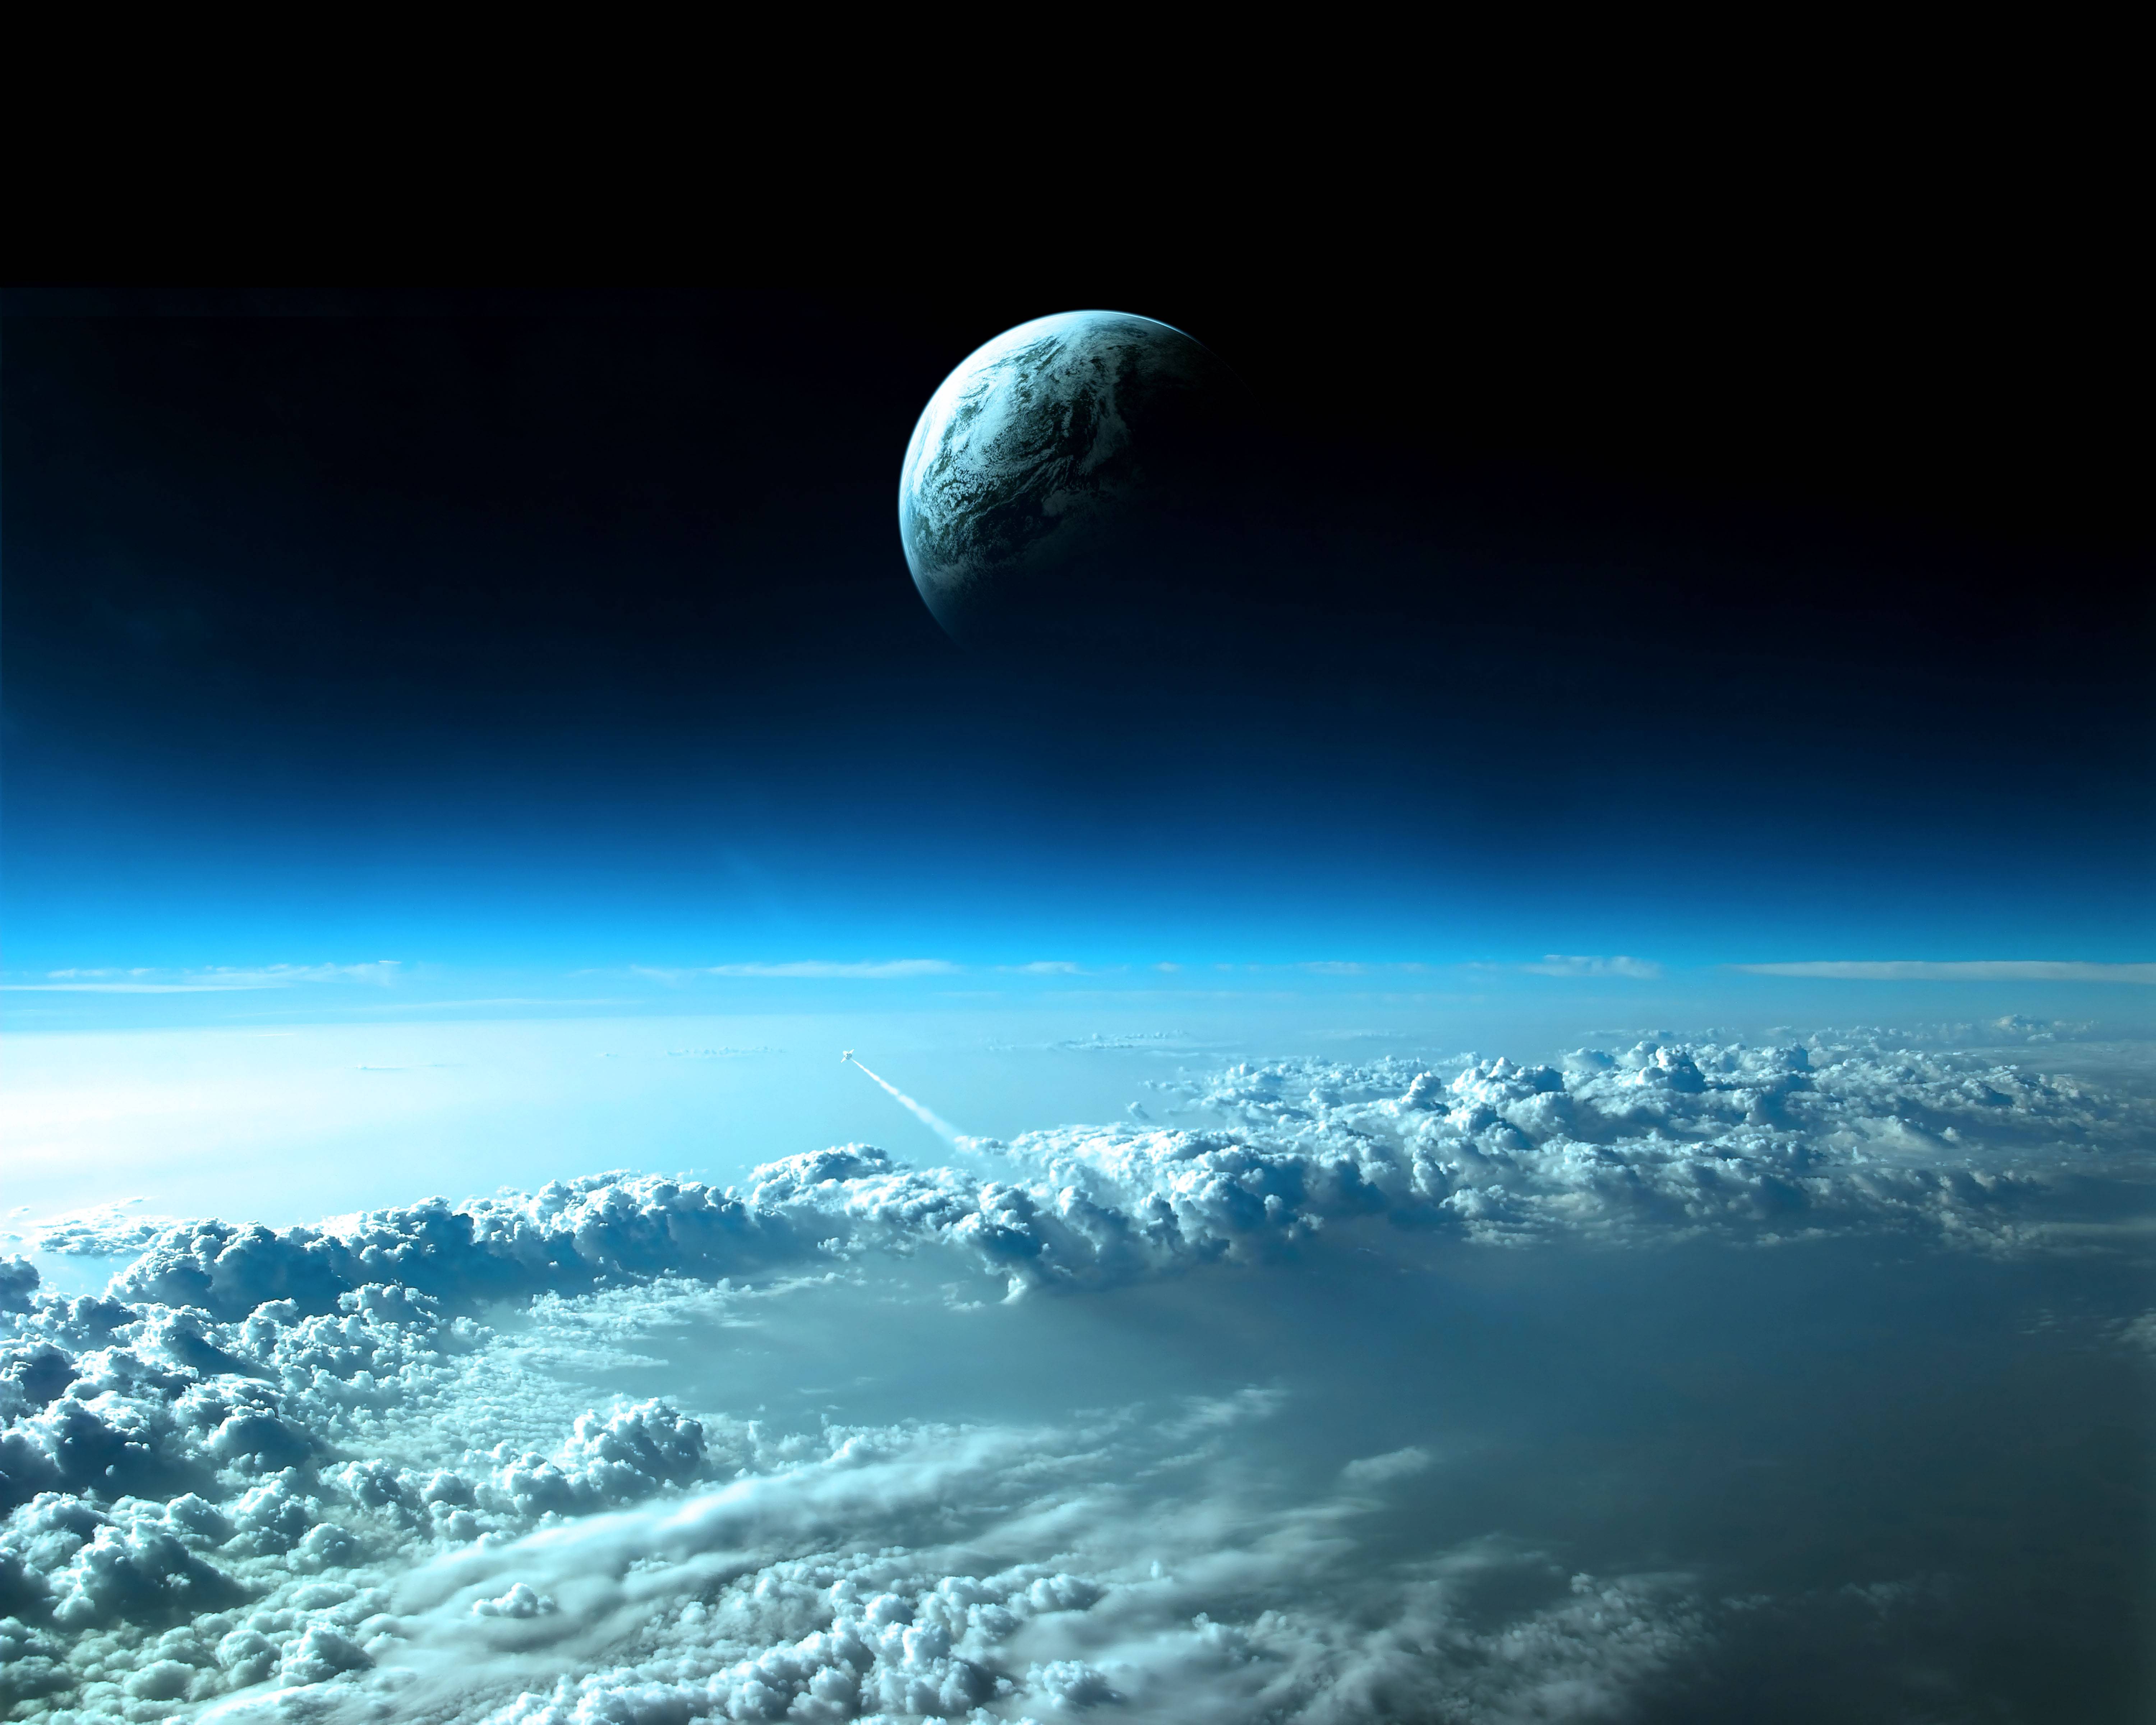 Blue planet wallpaper and image, picture, photo